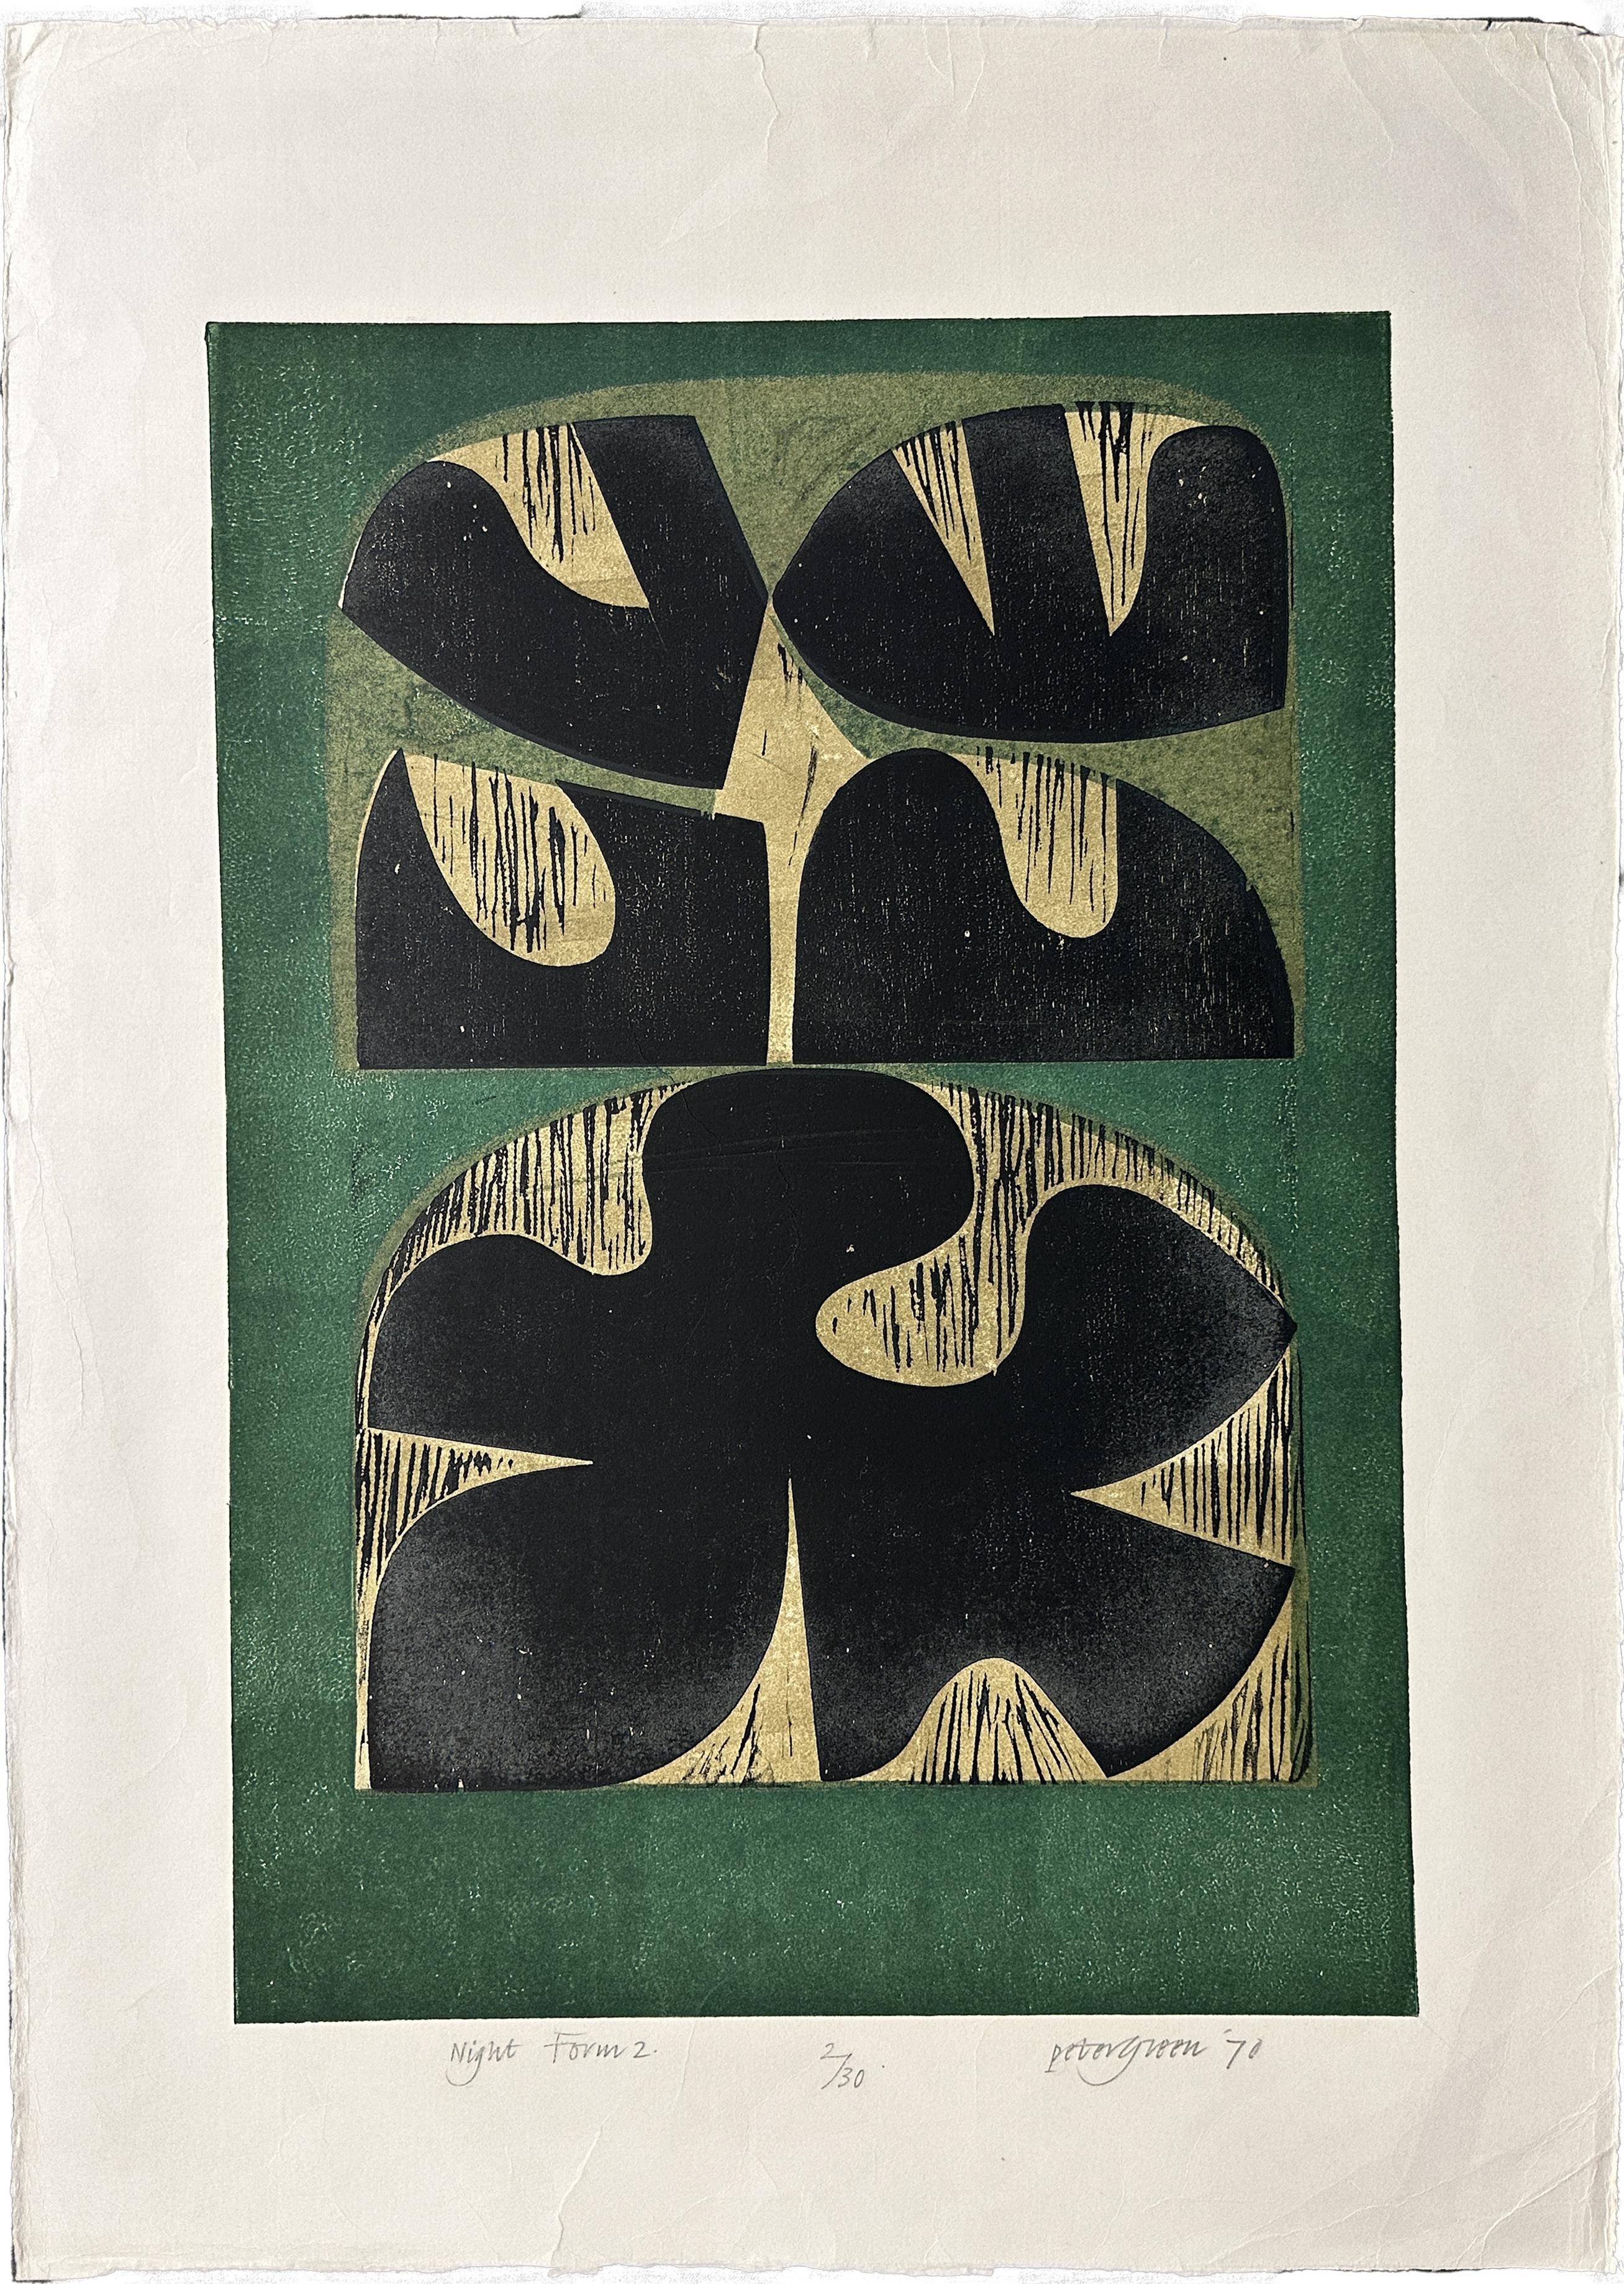 Night Form 2 1970 Signed Limited Edition Large Woodcut